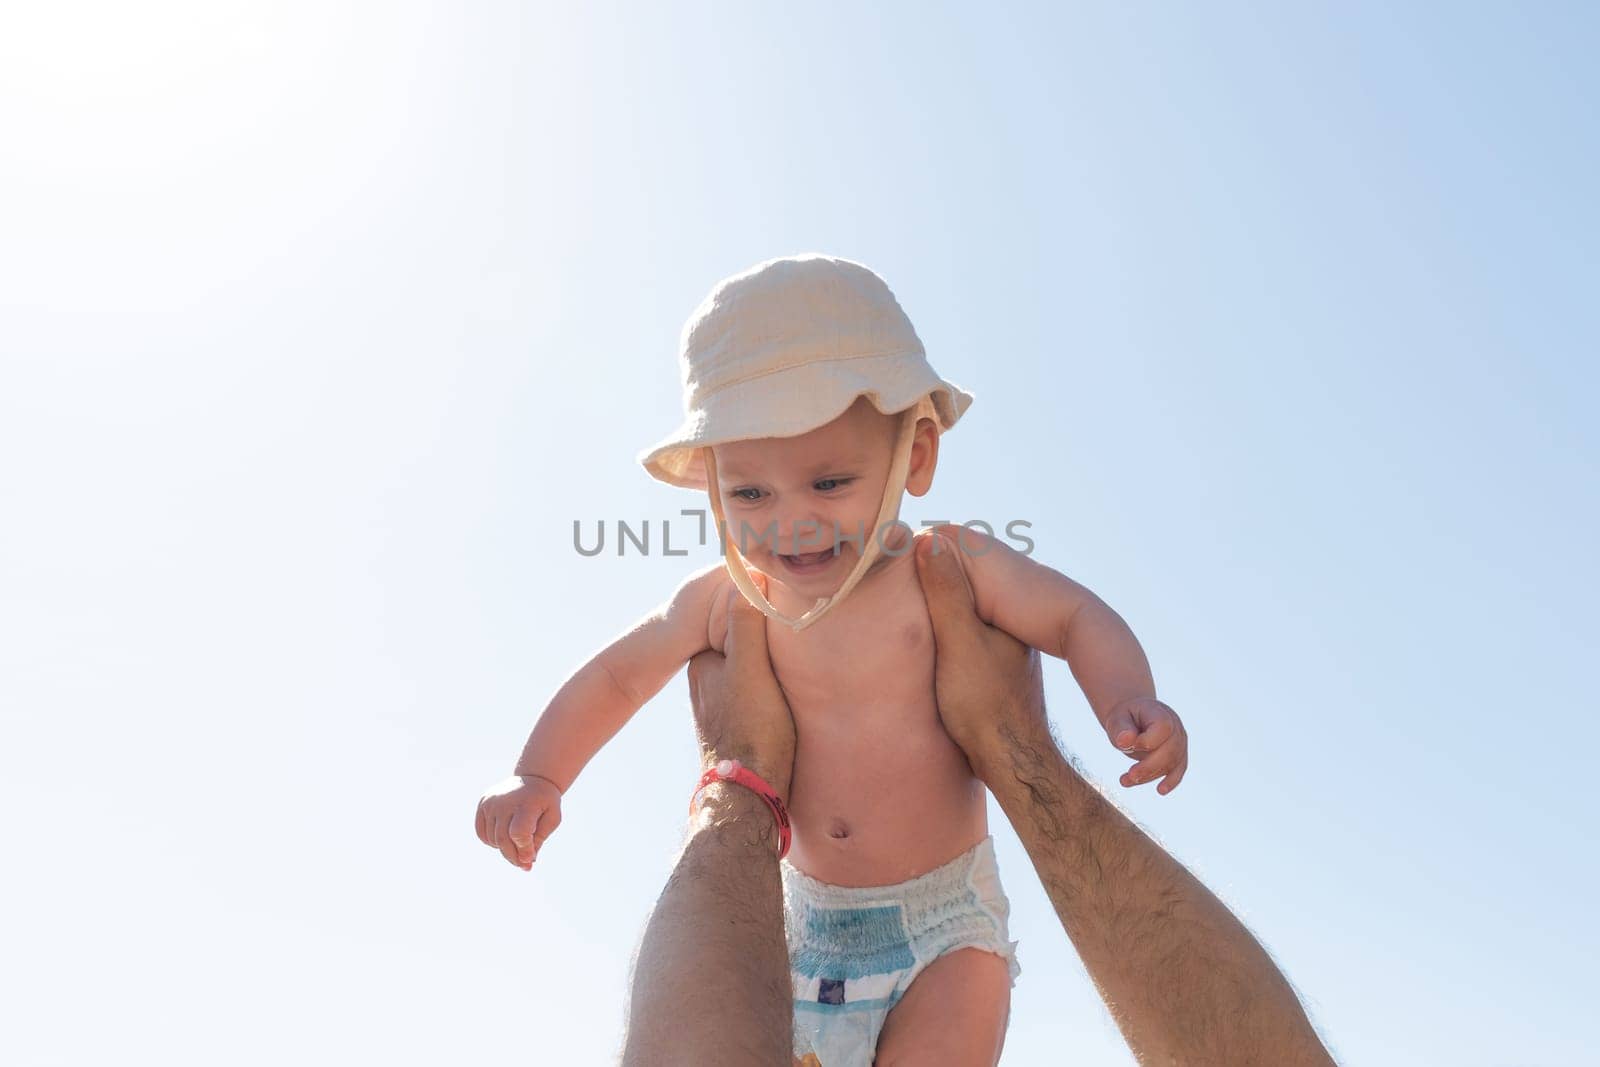 In a sun-kissed setting, a father joyfully lifts his baby towards the sky, capturing the essence of love and play. Concept of family bonding and joyful childhood